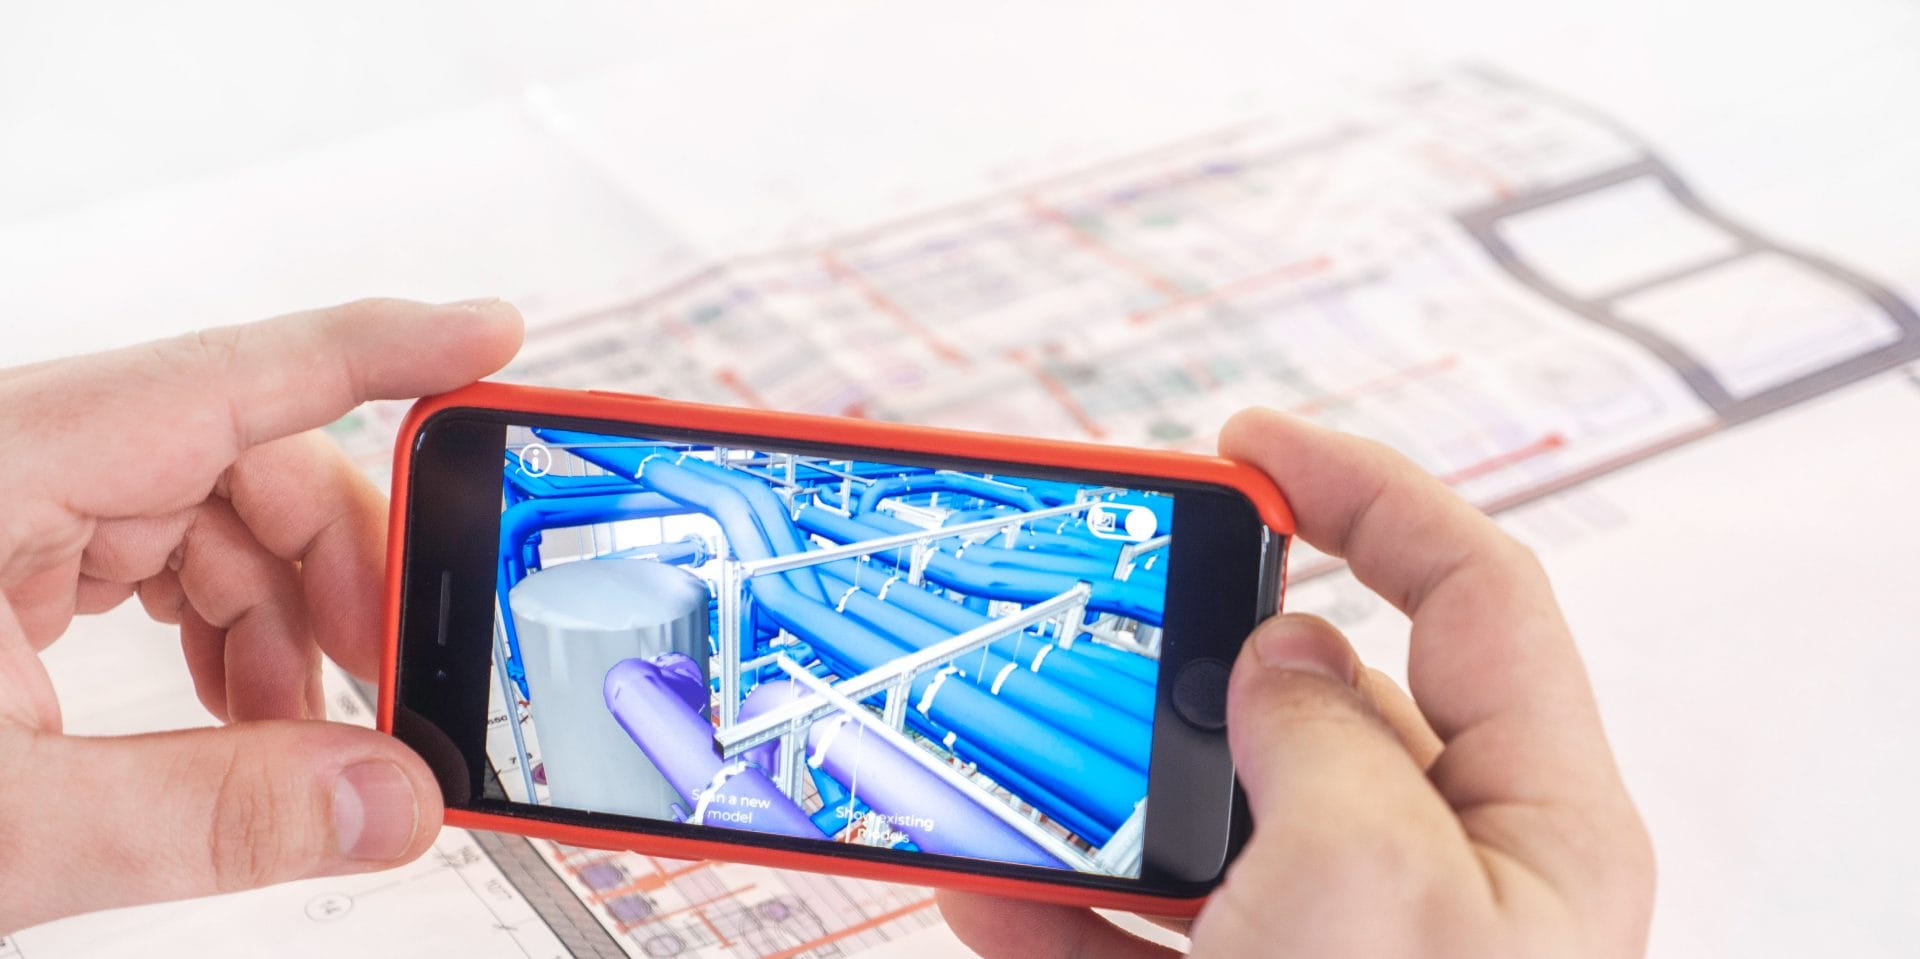 BIM used on a mobile device for paperless as-built documentation of a building